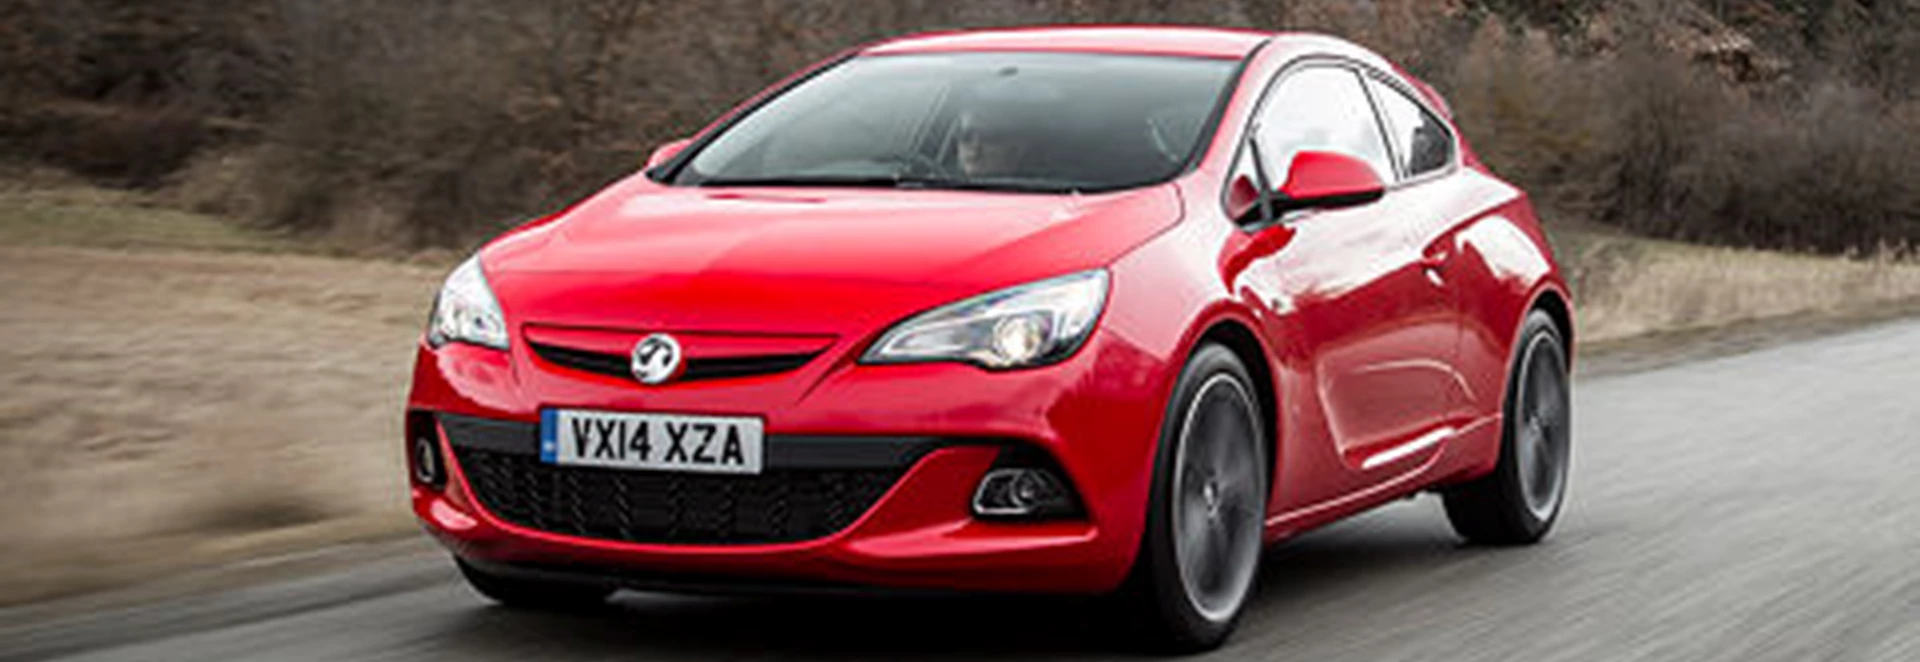 Vauxhall Astra GTC 1.6 Turbo 200PS Limited Edition 